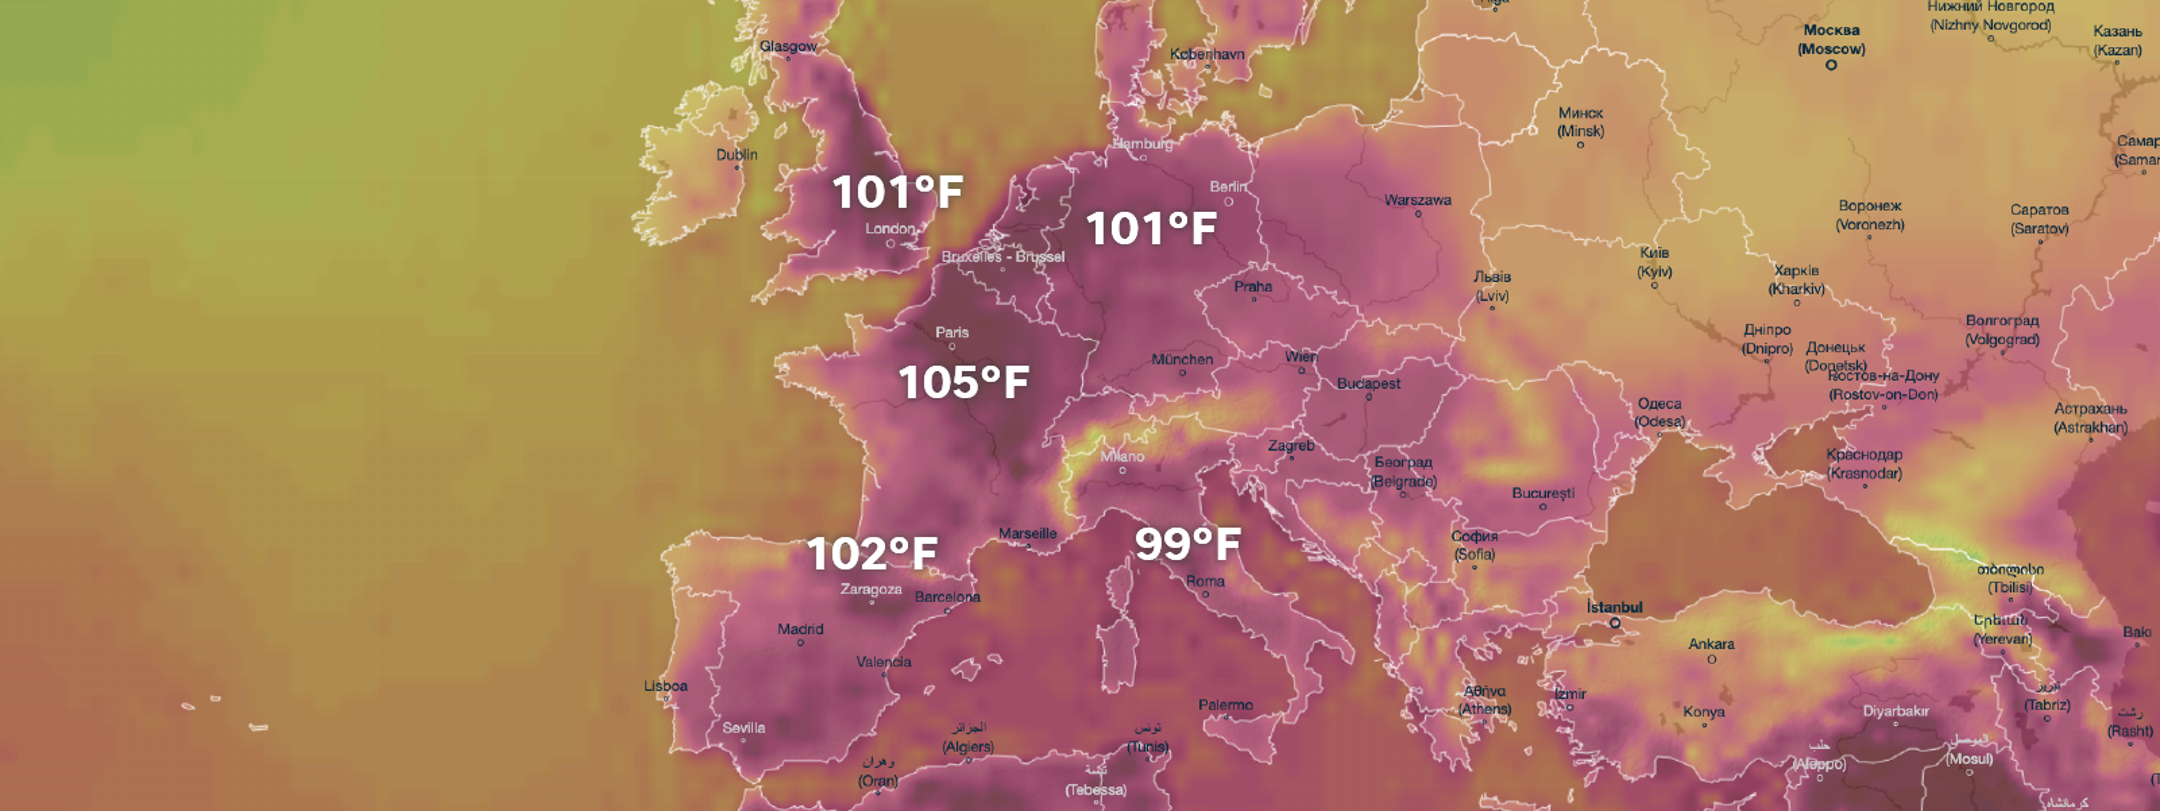 The Temperatures have been Scorching all Over the World